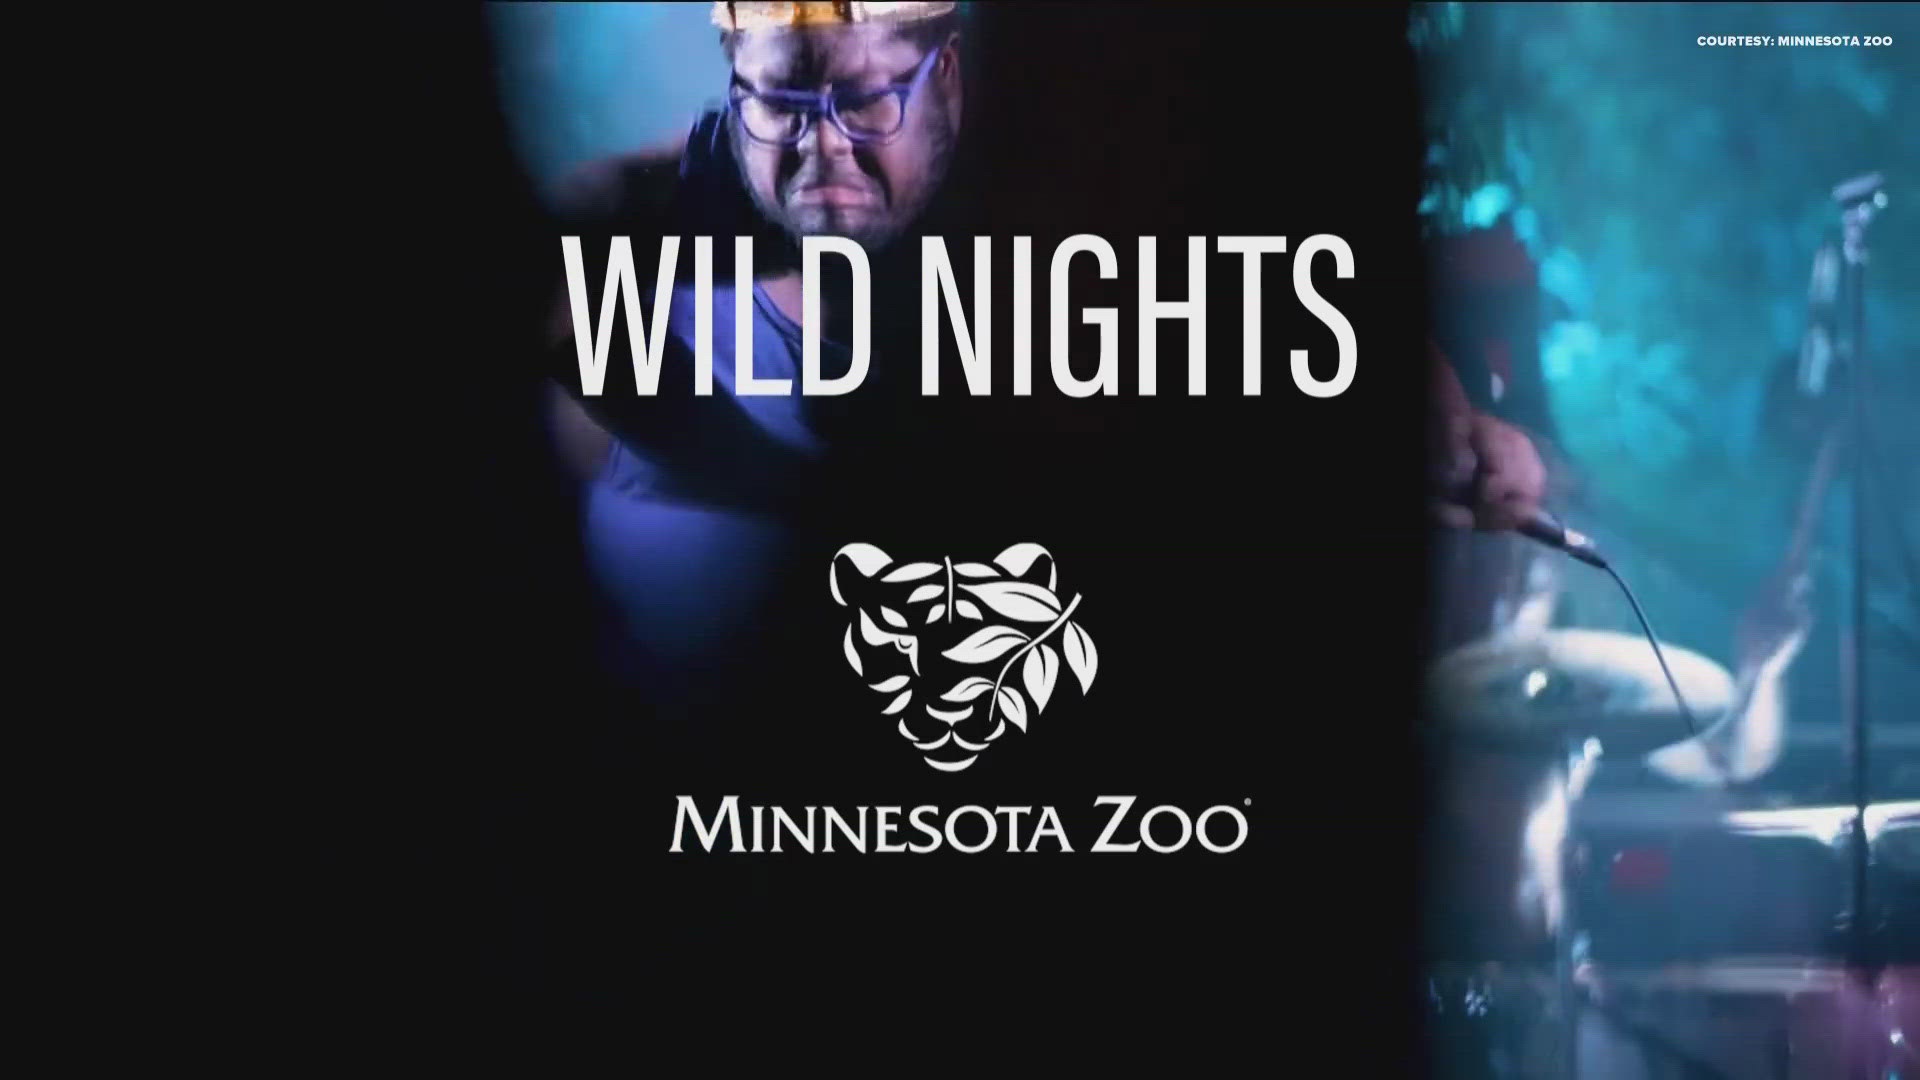 The Zoo invites guests to experience nature and music at its summer festival series.